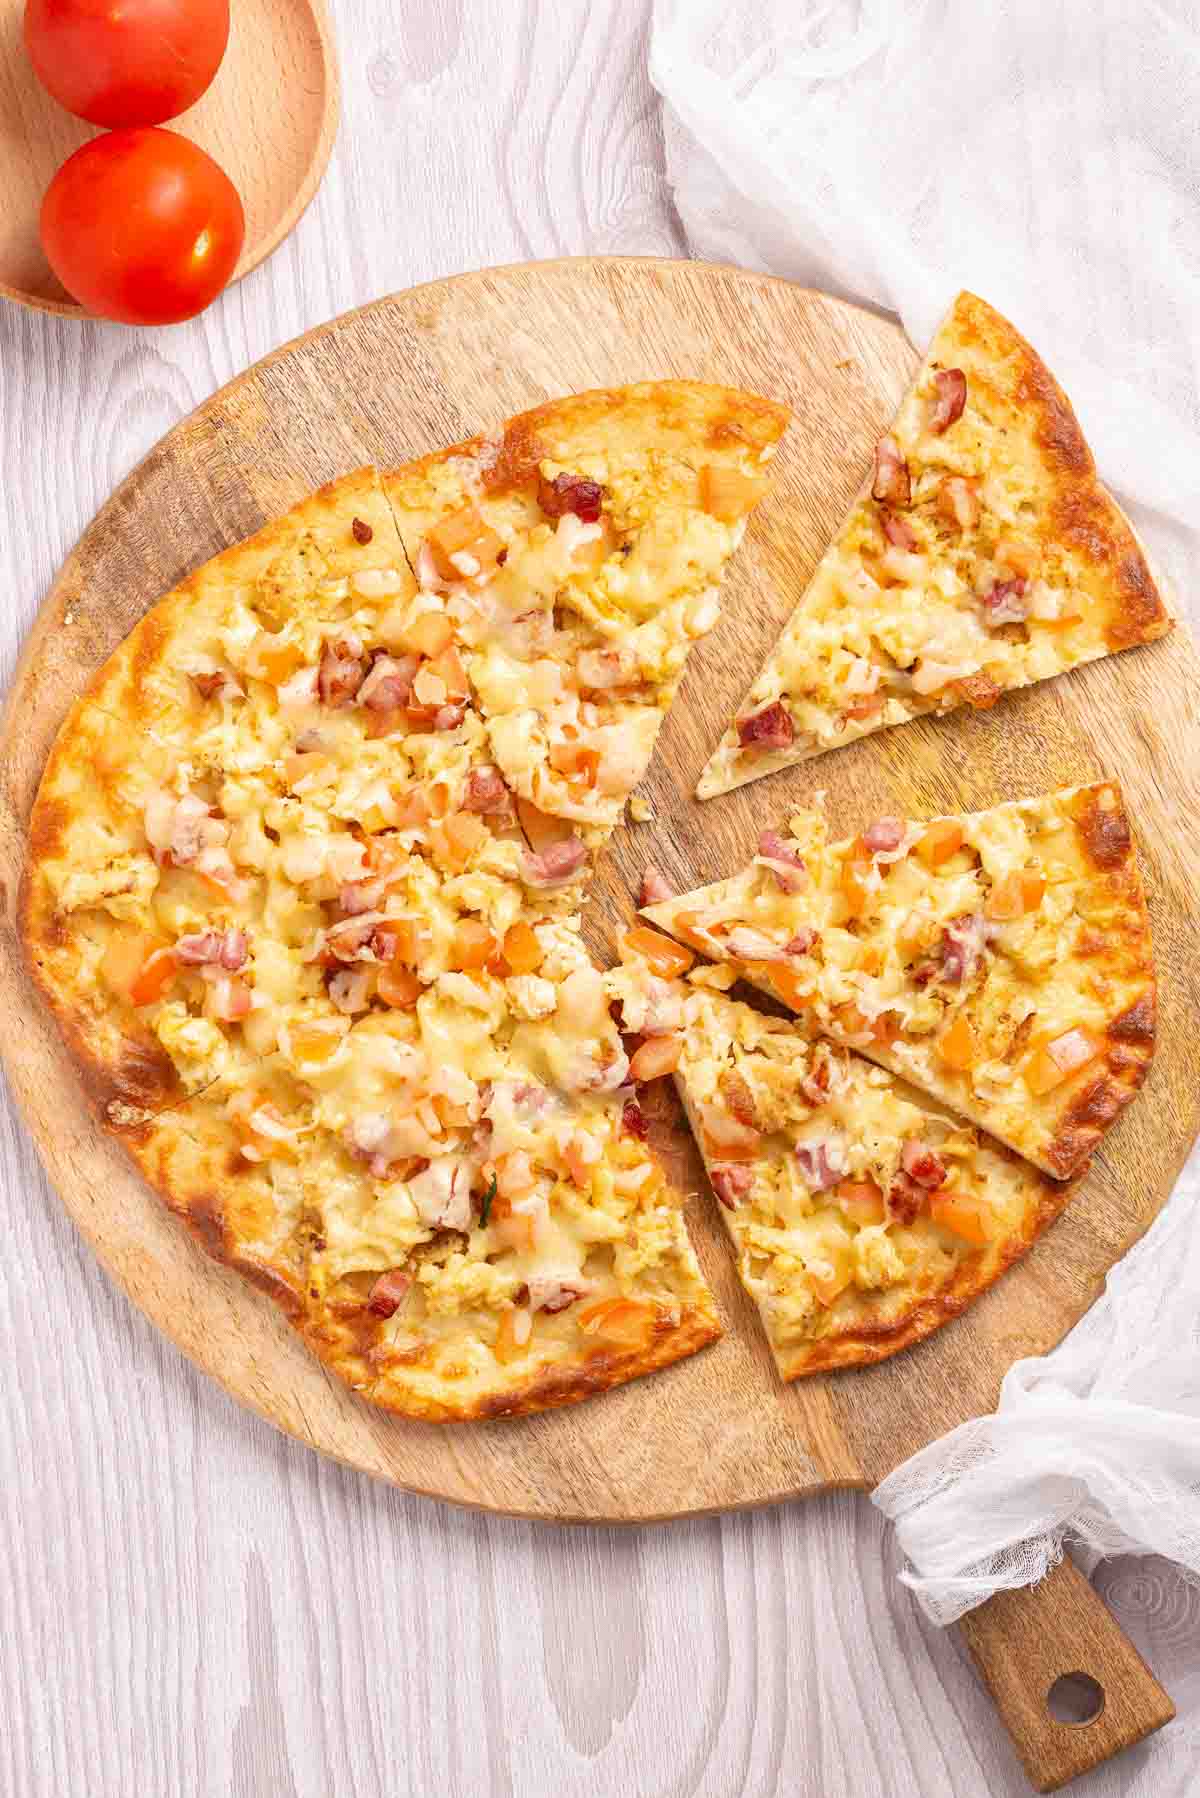 Scramble eggs, bacon , tomatoes and cheese and a low-carb pizza crust.